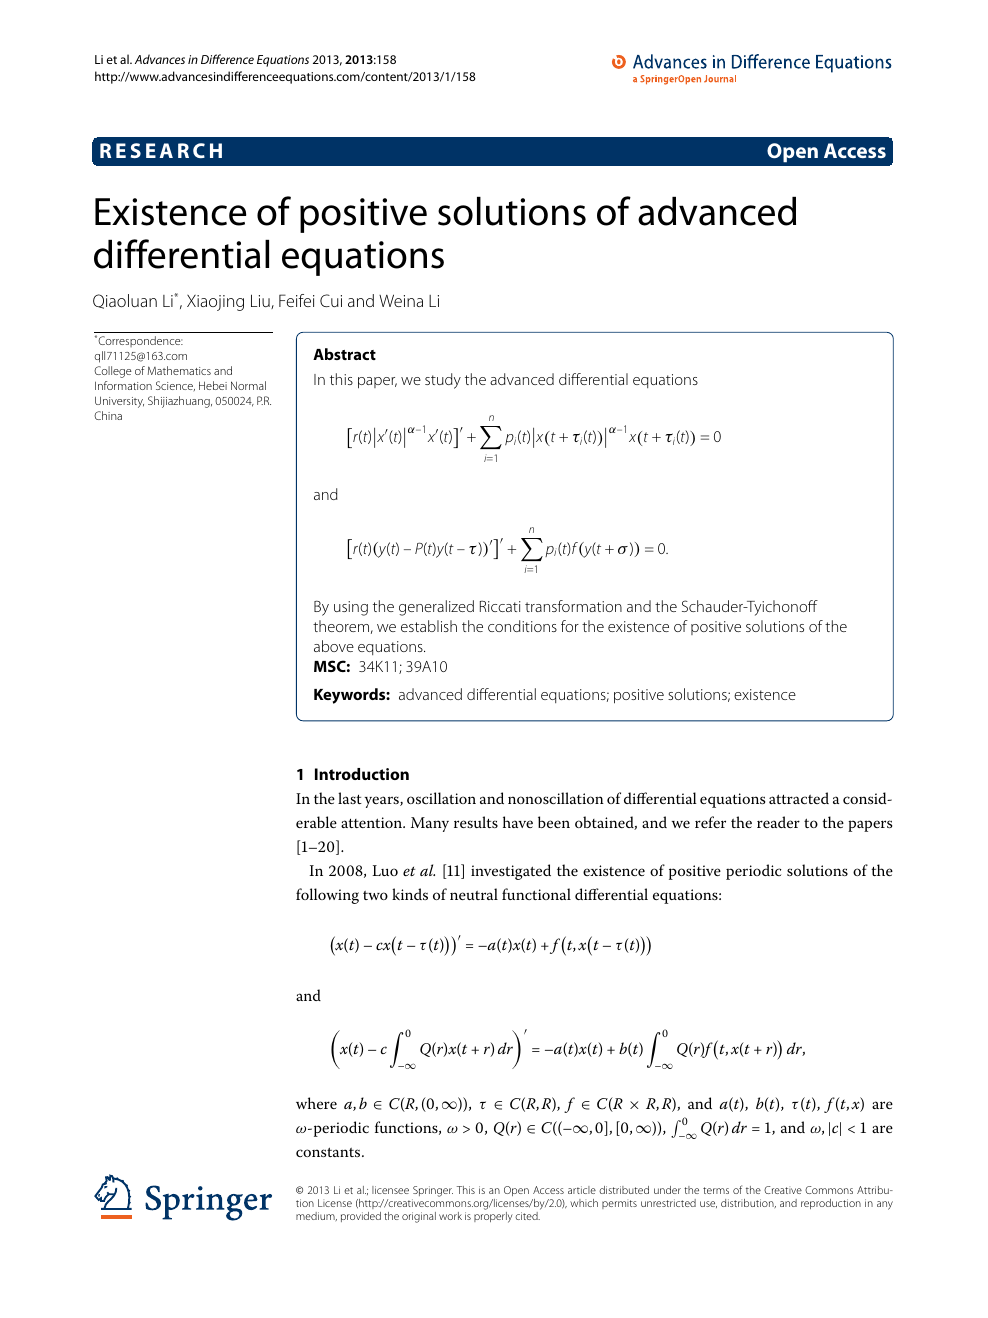 Existence Of Positive Solutions Of Advanced Differential Equations Topic Of Research Paper In Mathematics Download Scholarly Article Pdf And Read For Free On Cyberleninka Open Science Hub